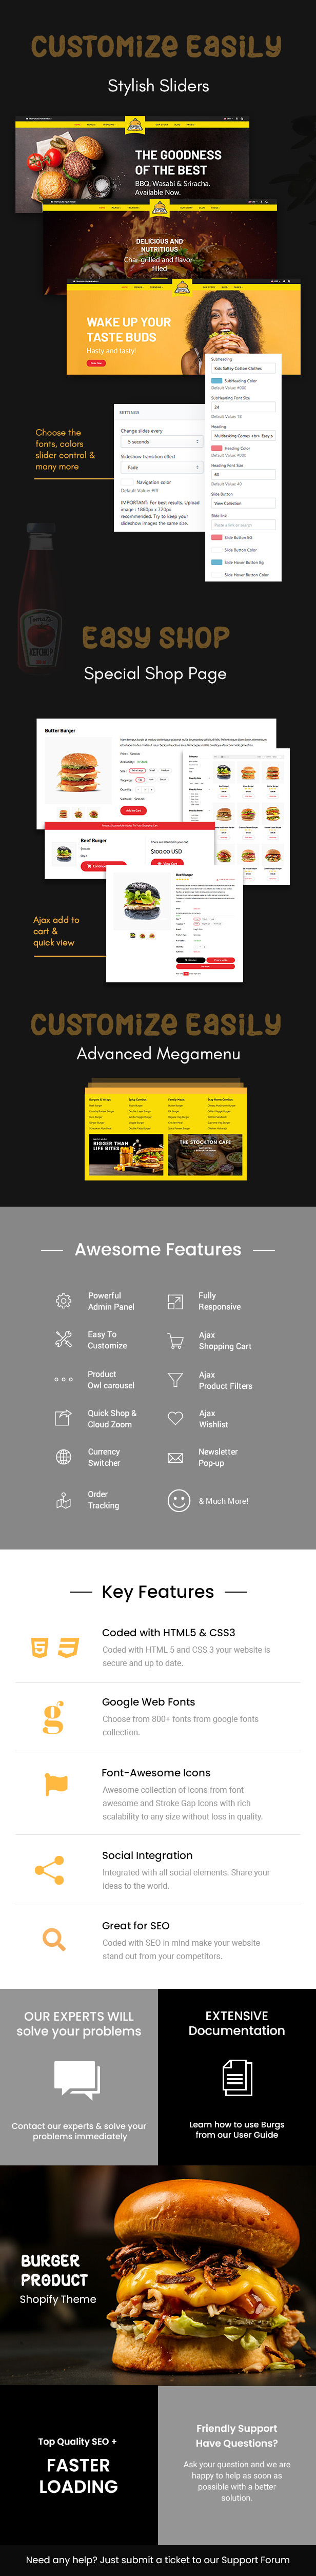 Burgs - Food Delivery Shopify Theme - 1